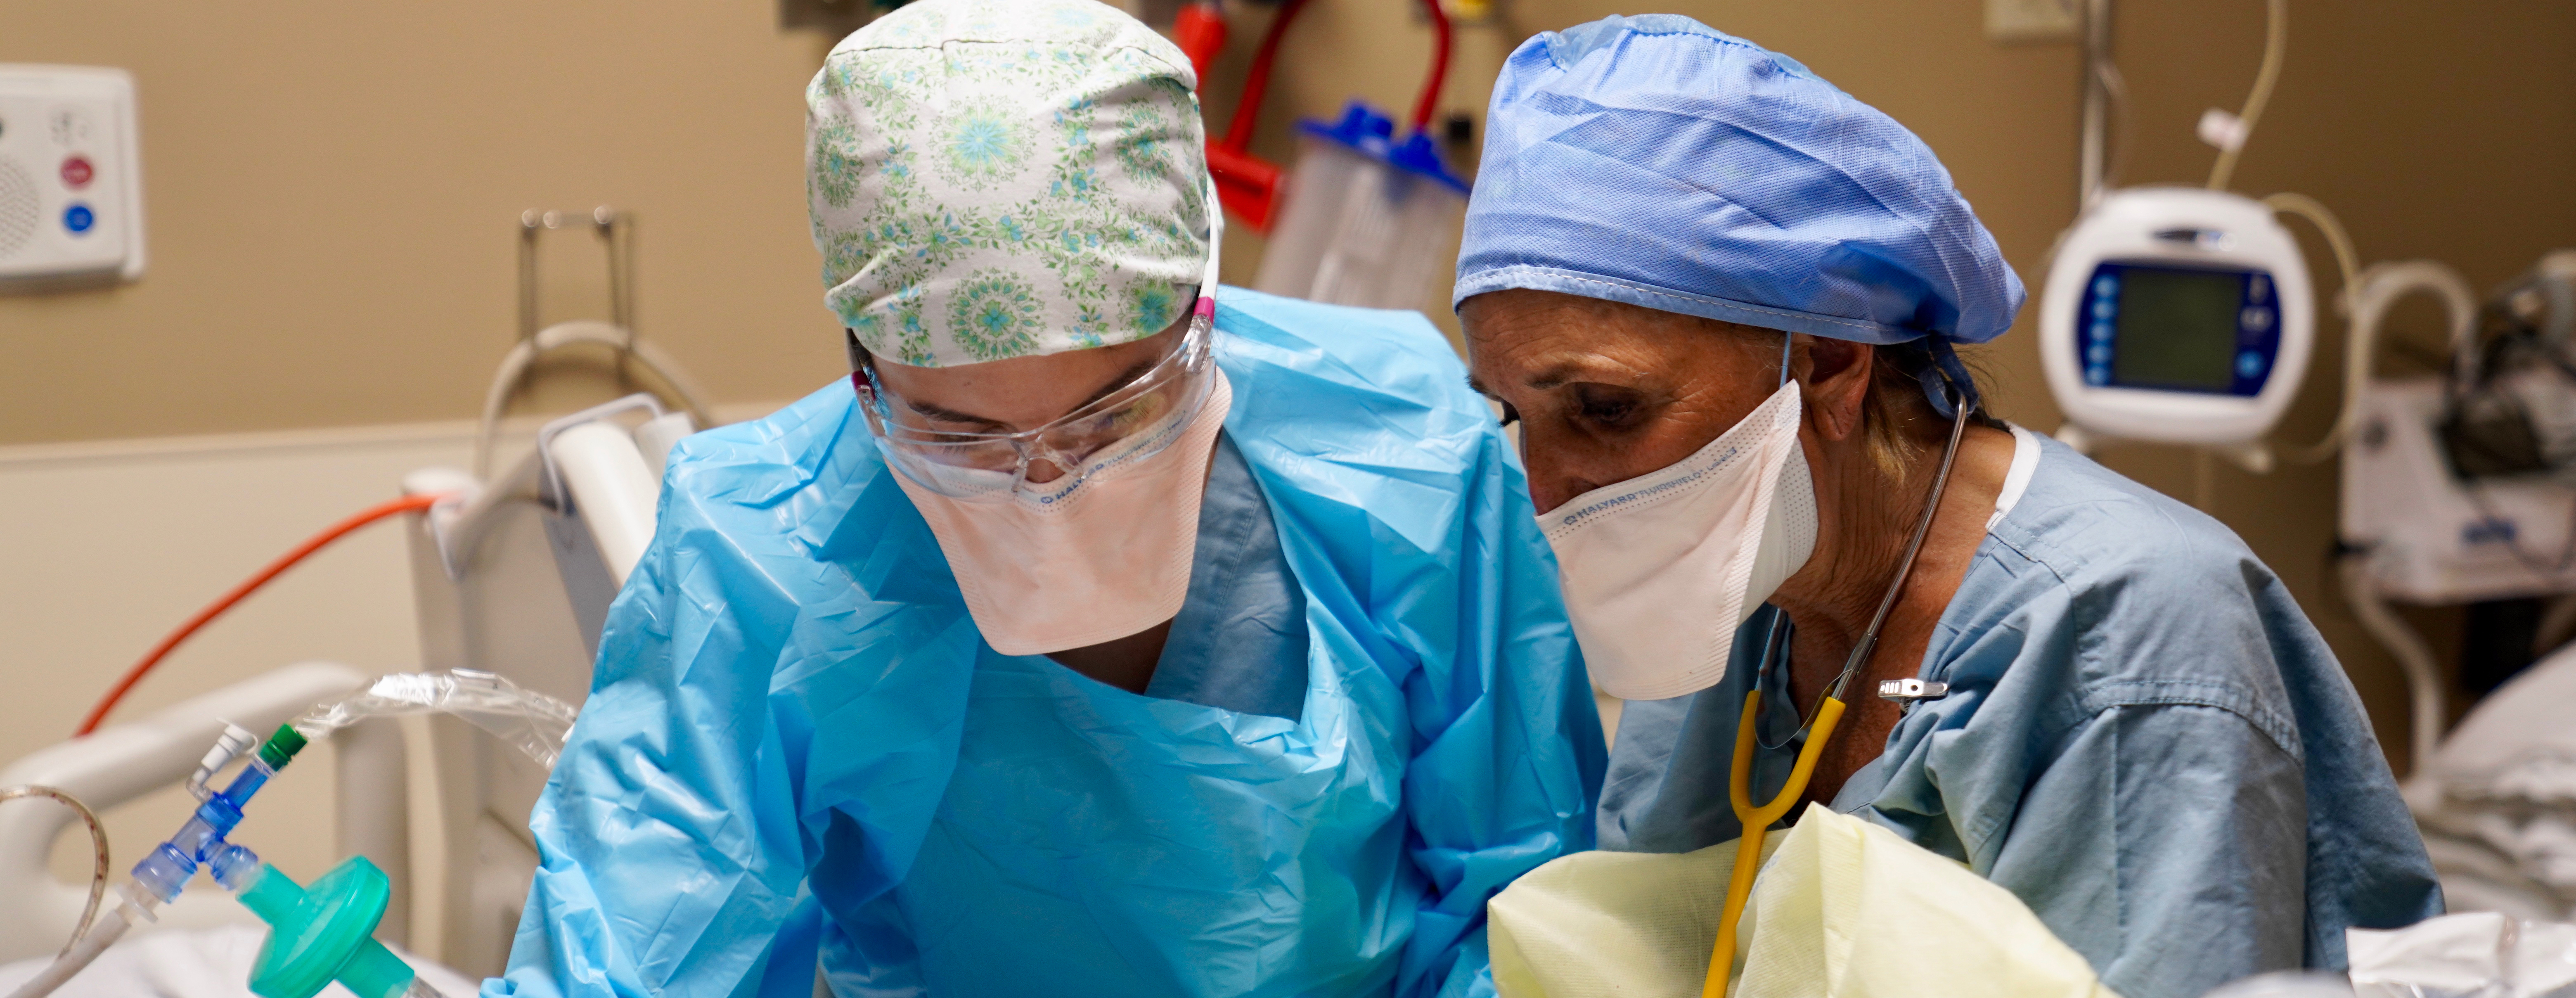 A male and female medical professional in a critical care environment